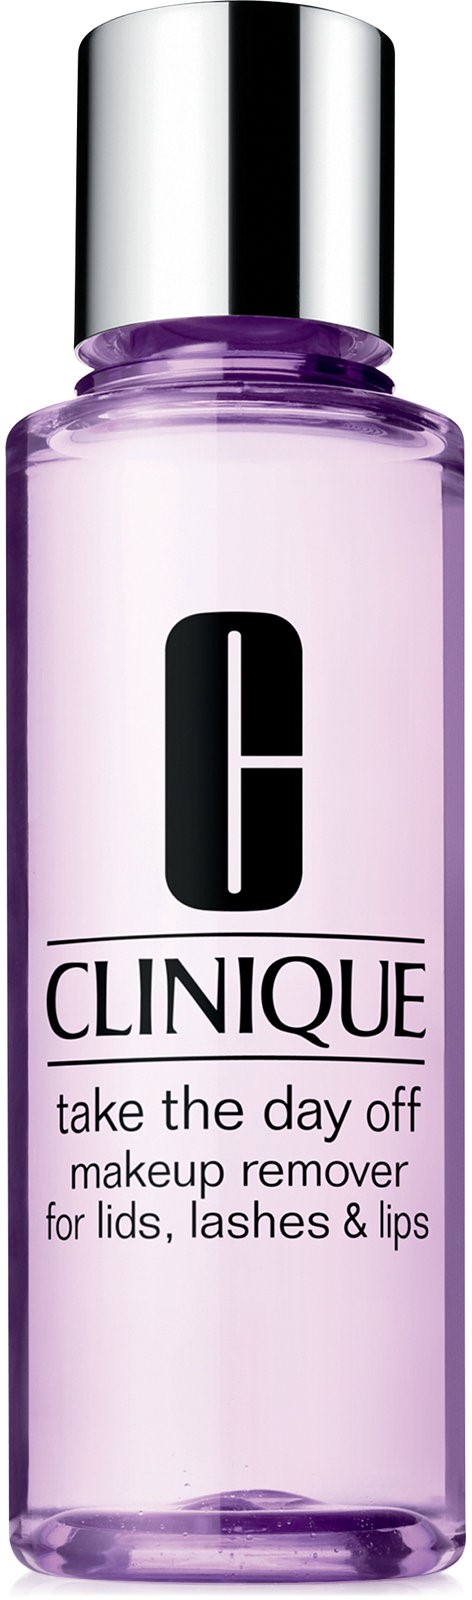 Clinique Take The Day Off Make Up Remover, 4.2 Oz